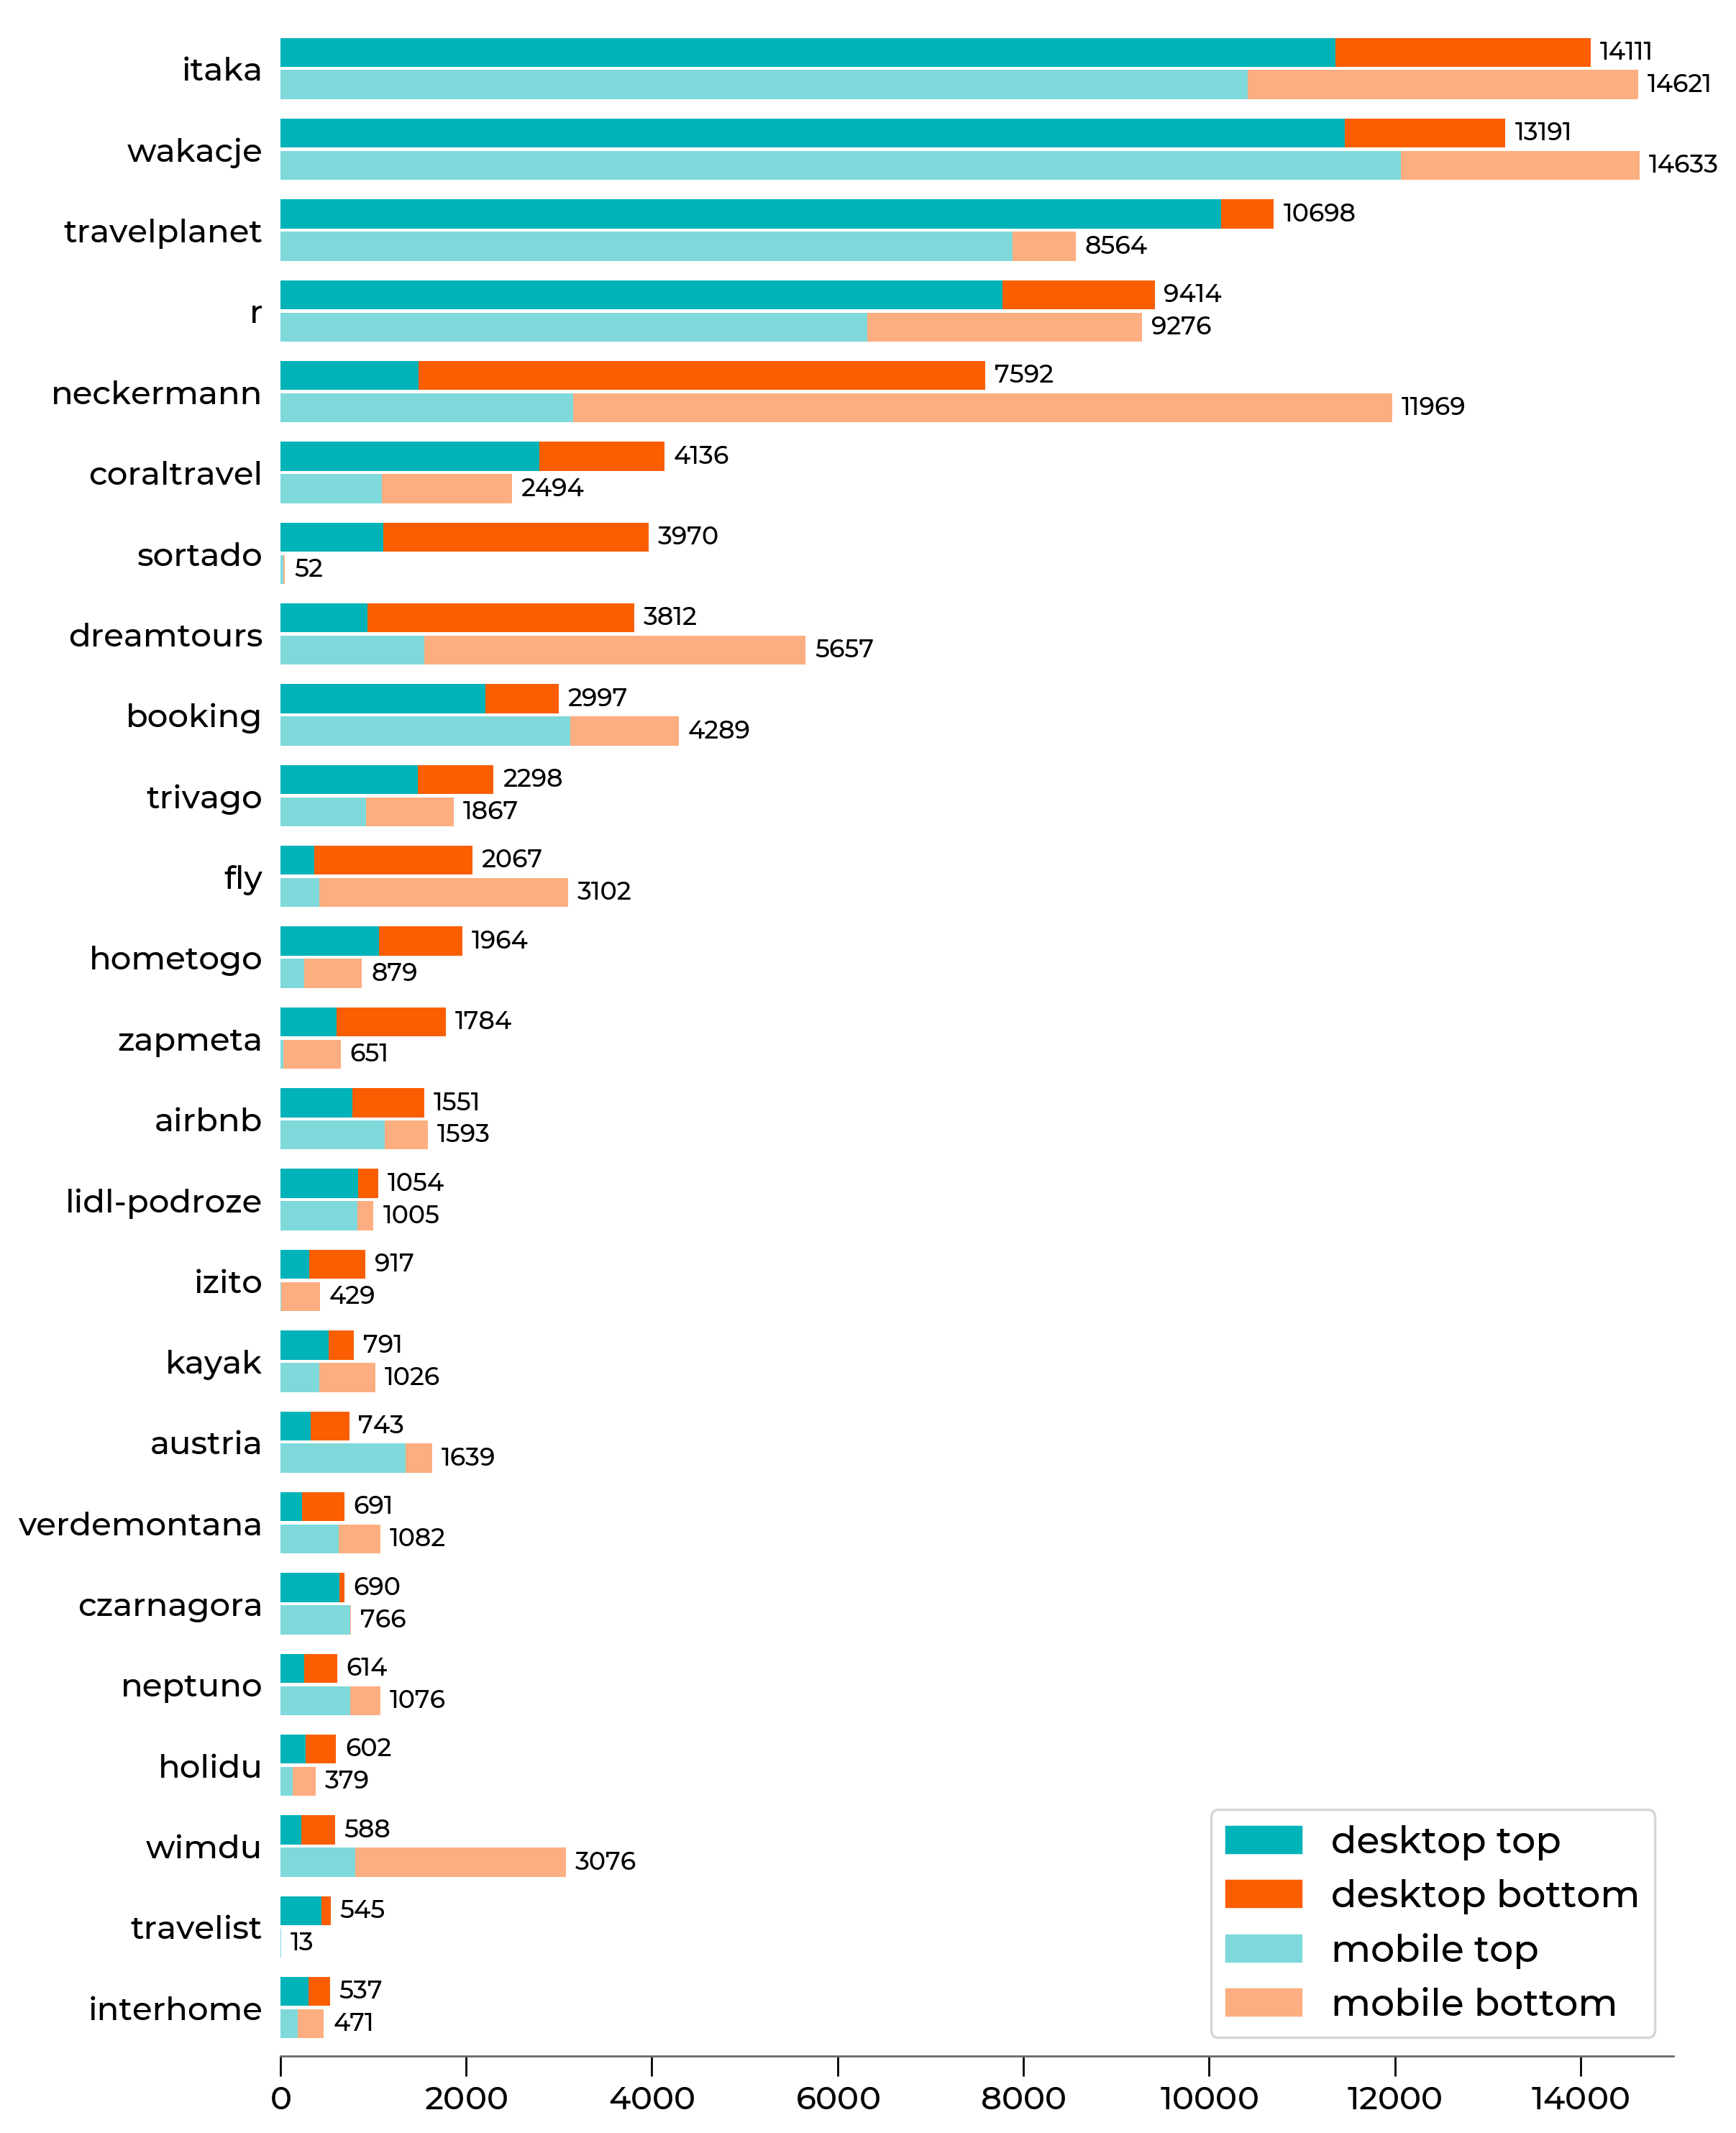 TOP 25 domains with the highest visibility on desktop computers.